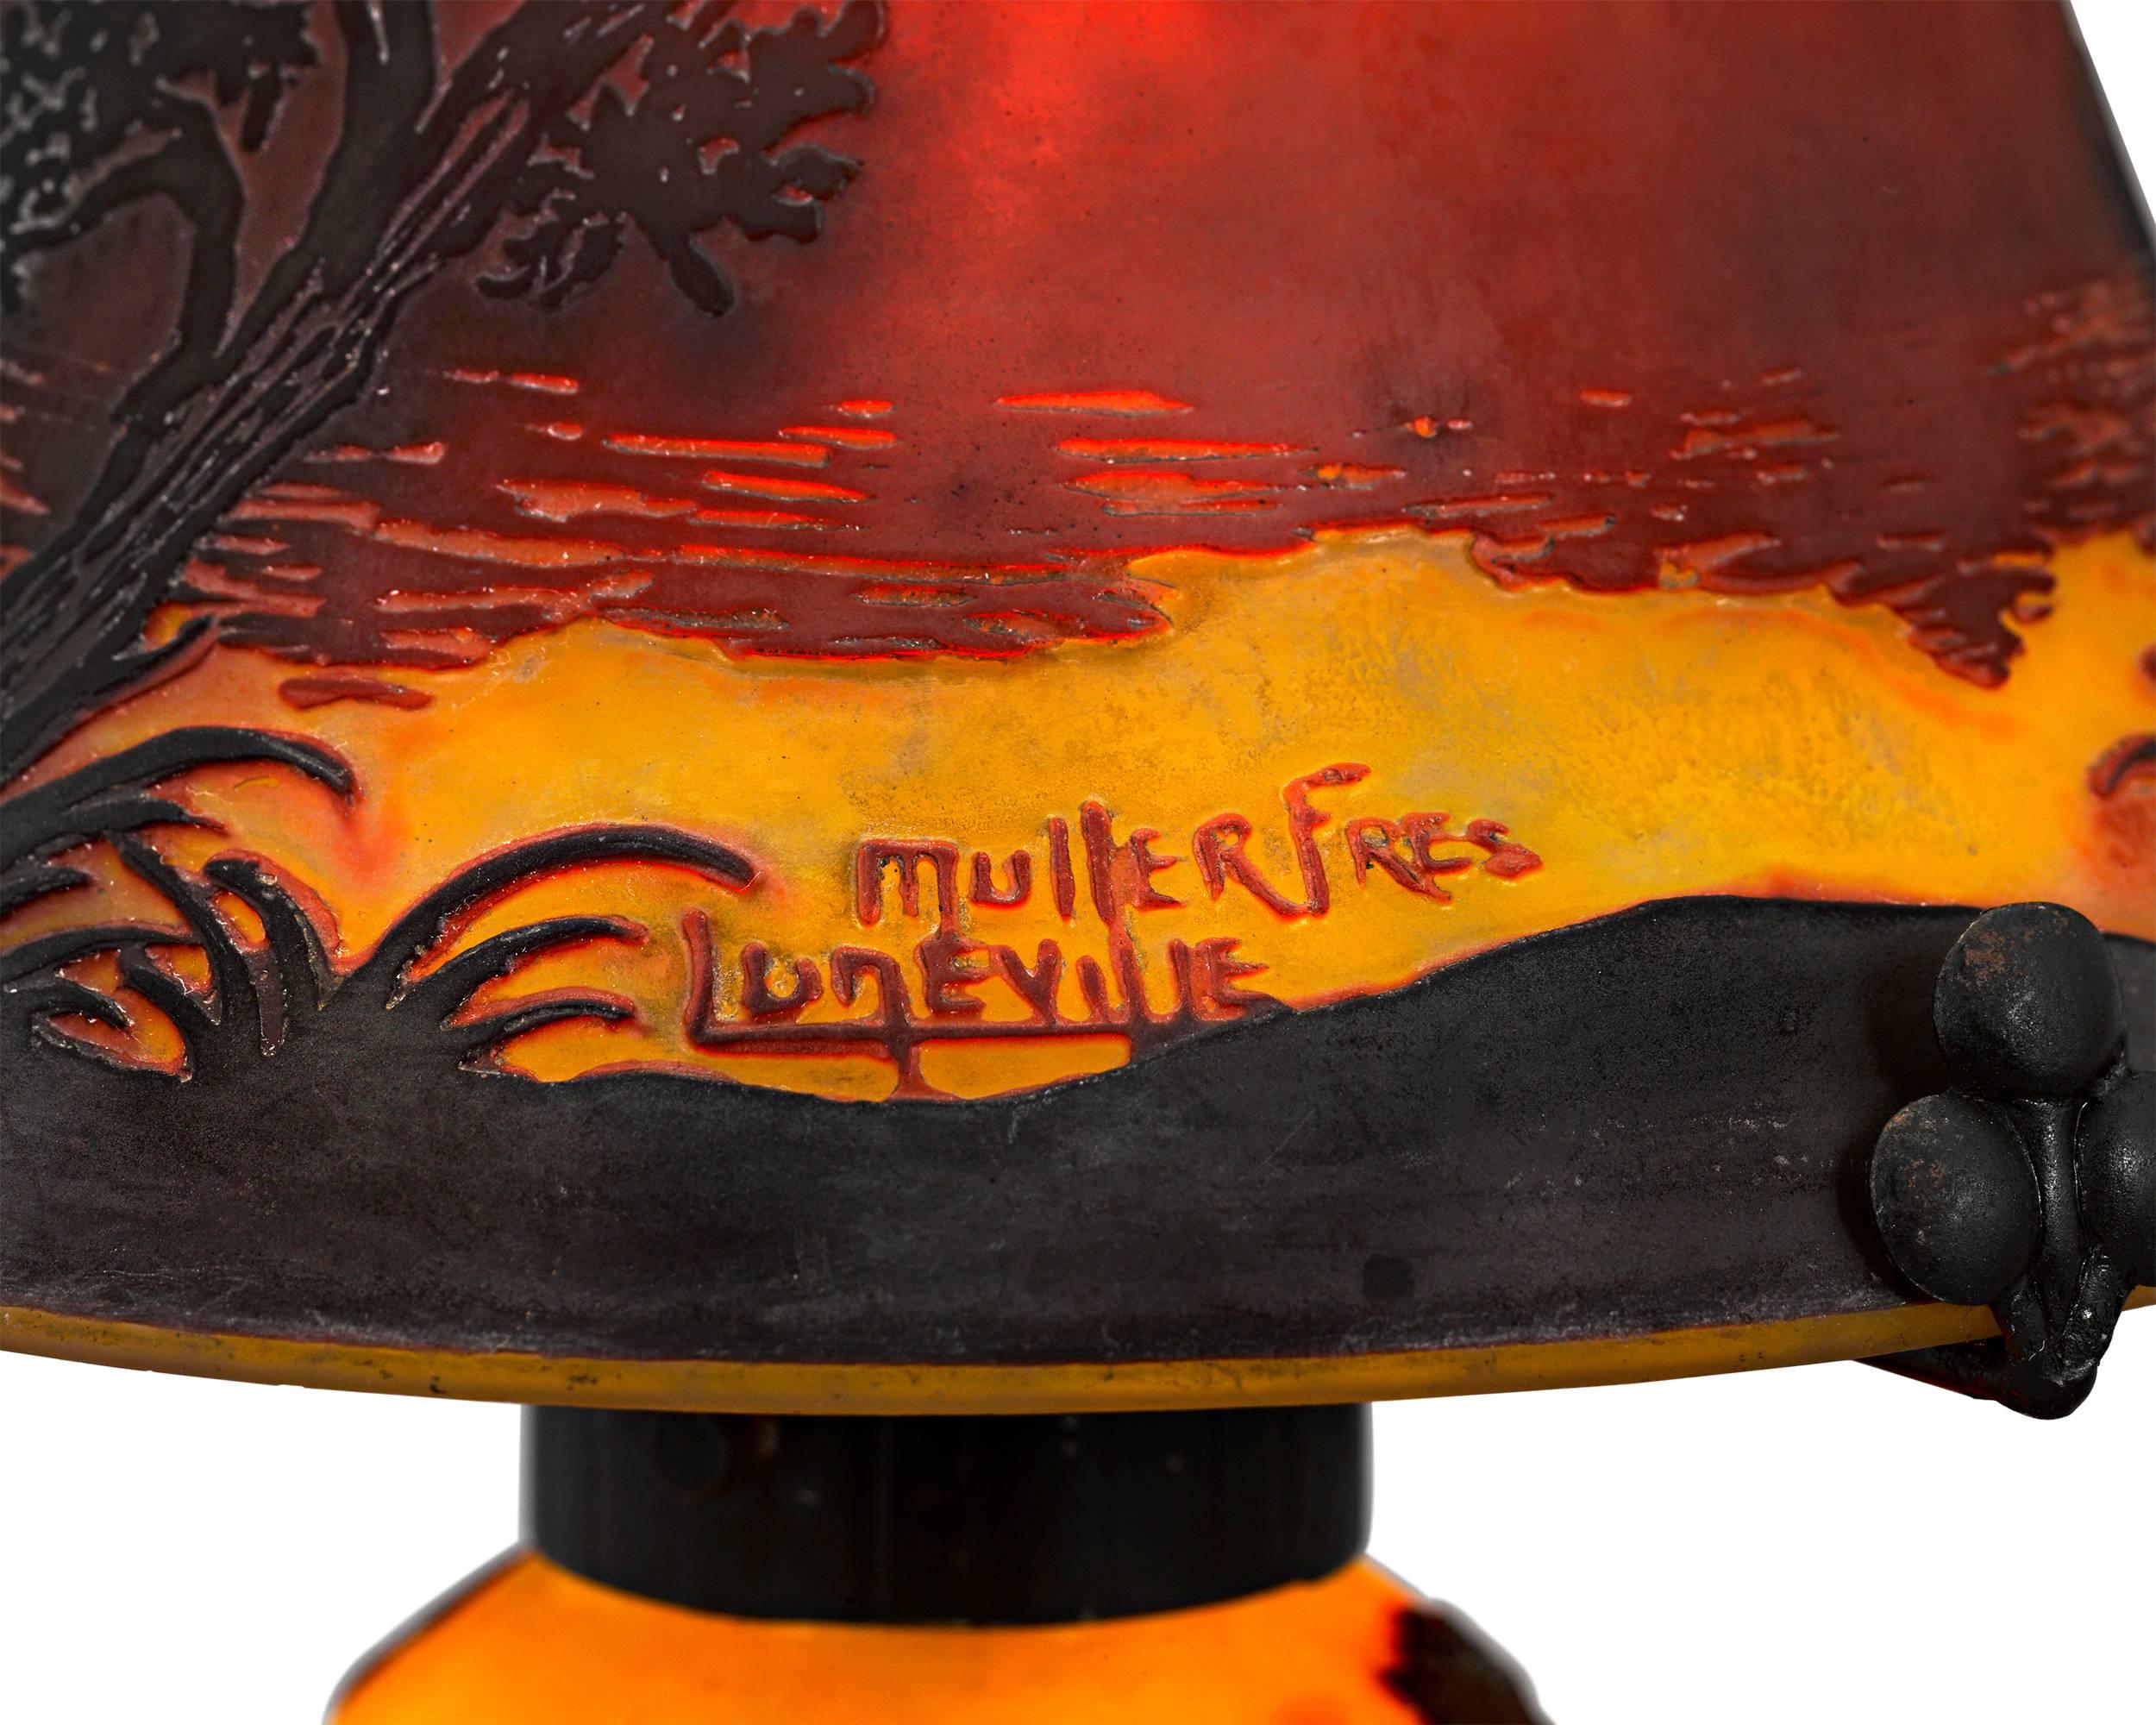 This eye-catching cameo glass lamp from the celebrated Muller Frères glassworks is an exquisite example of the art form. The shade and base are executed in vibrant shades of orange, yellow and terra cotta, which come together to create the